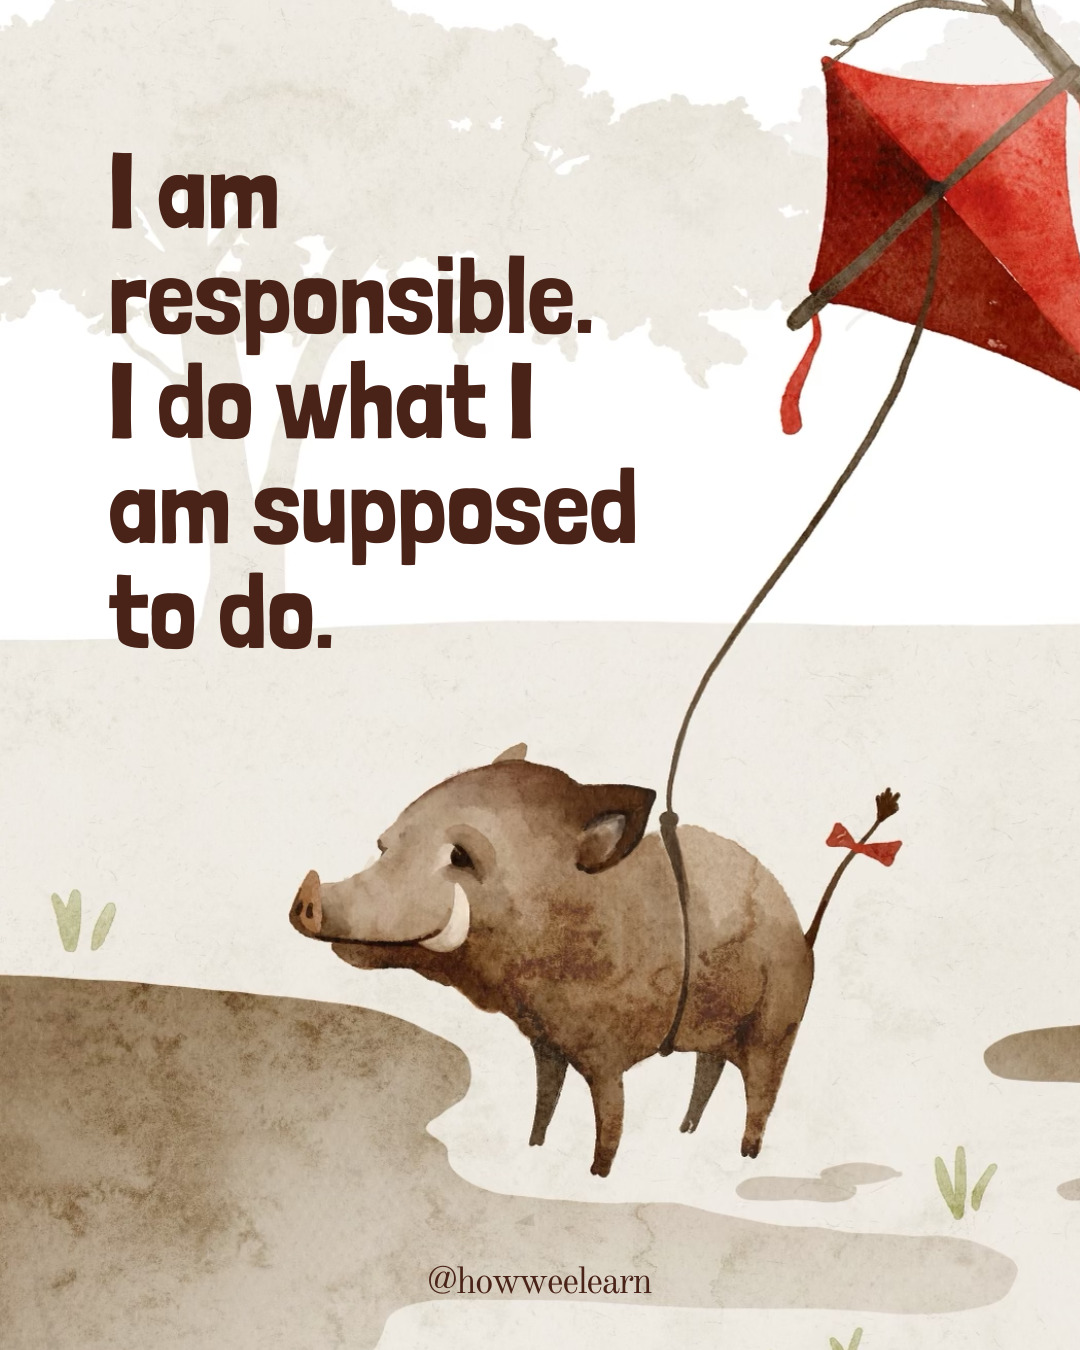 I am responsible. I do what I am supposed to do.